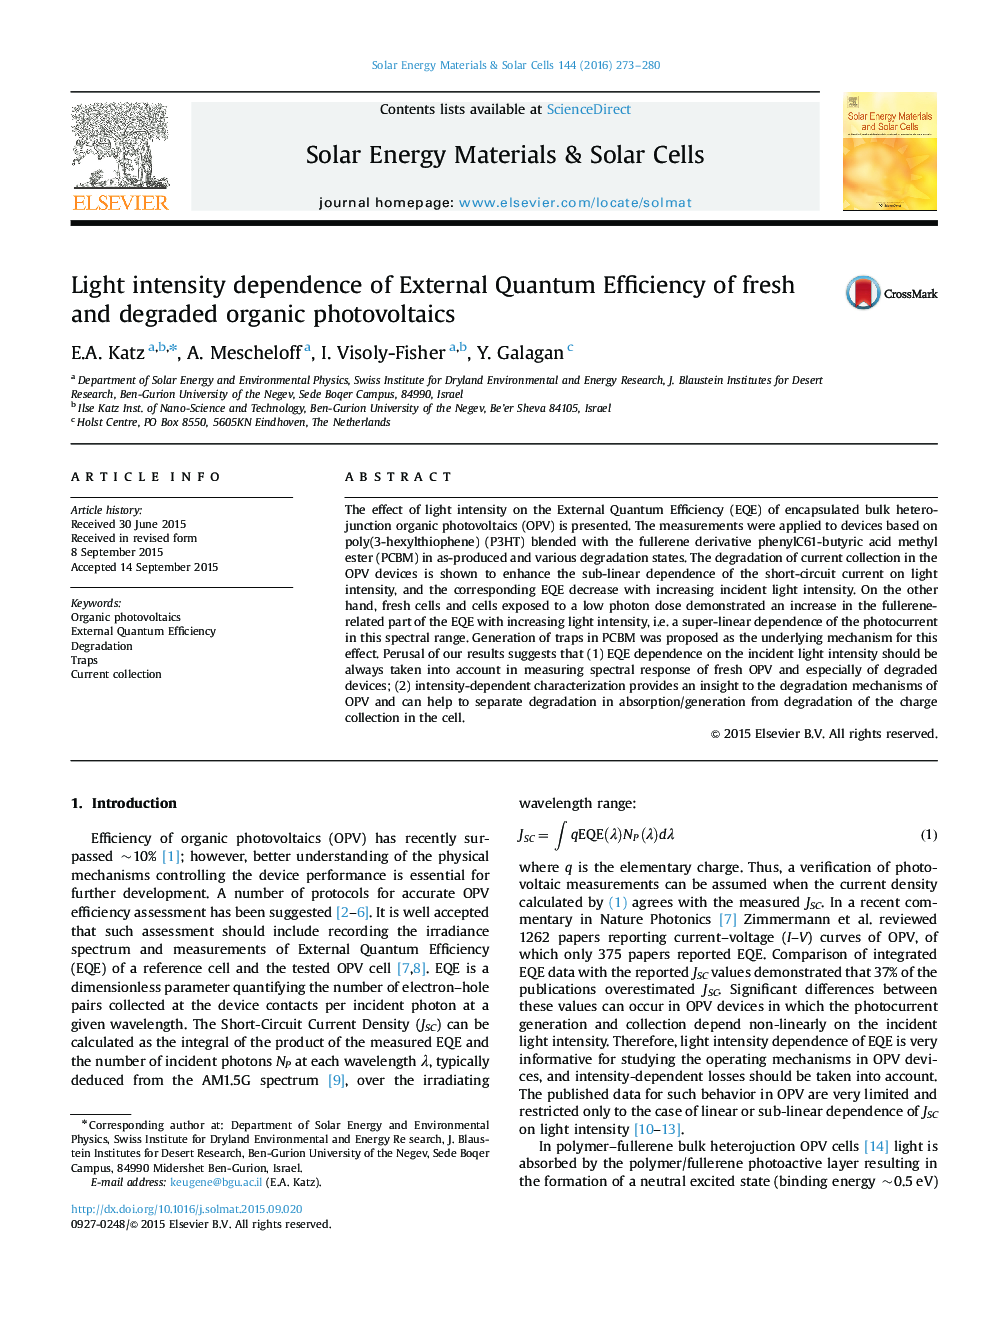 Light intensity dependence of External Quantum Efficiency of fresh and degraded organic photovoltaics